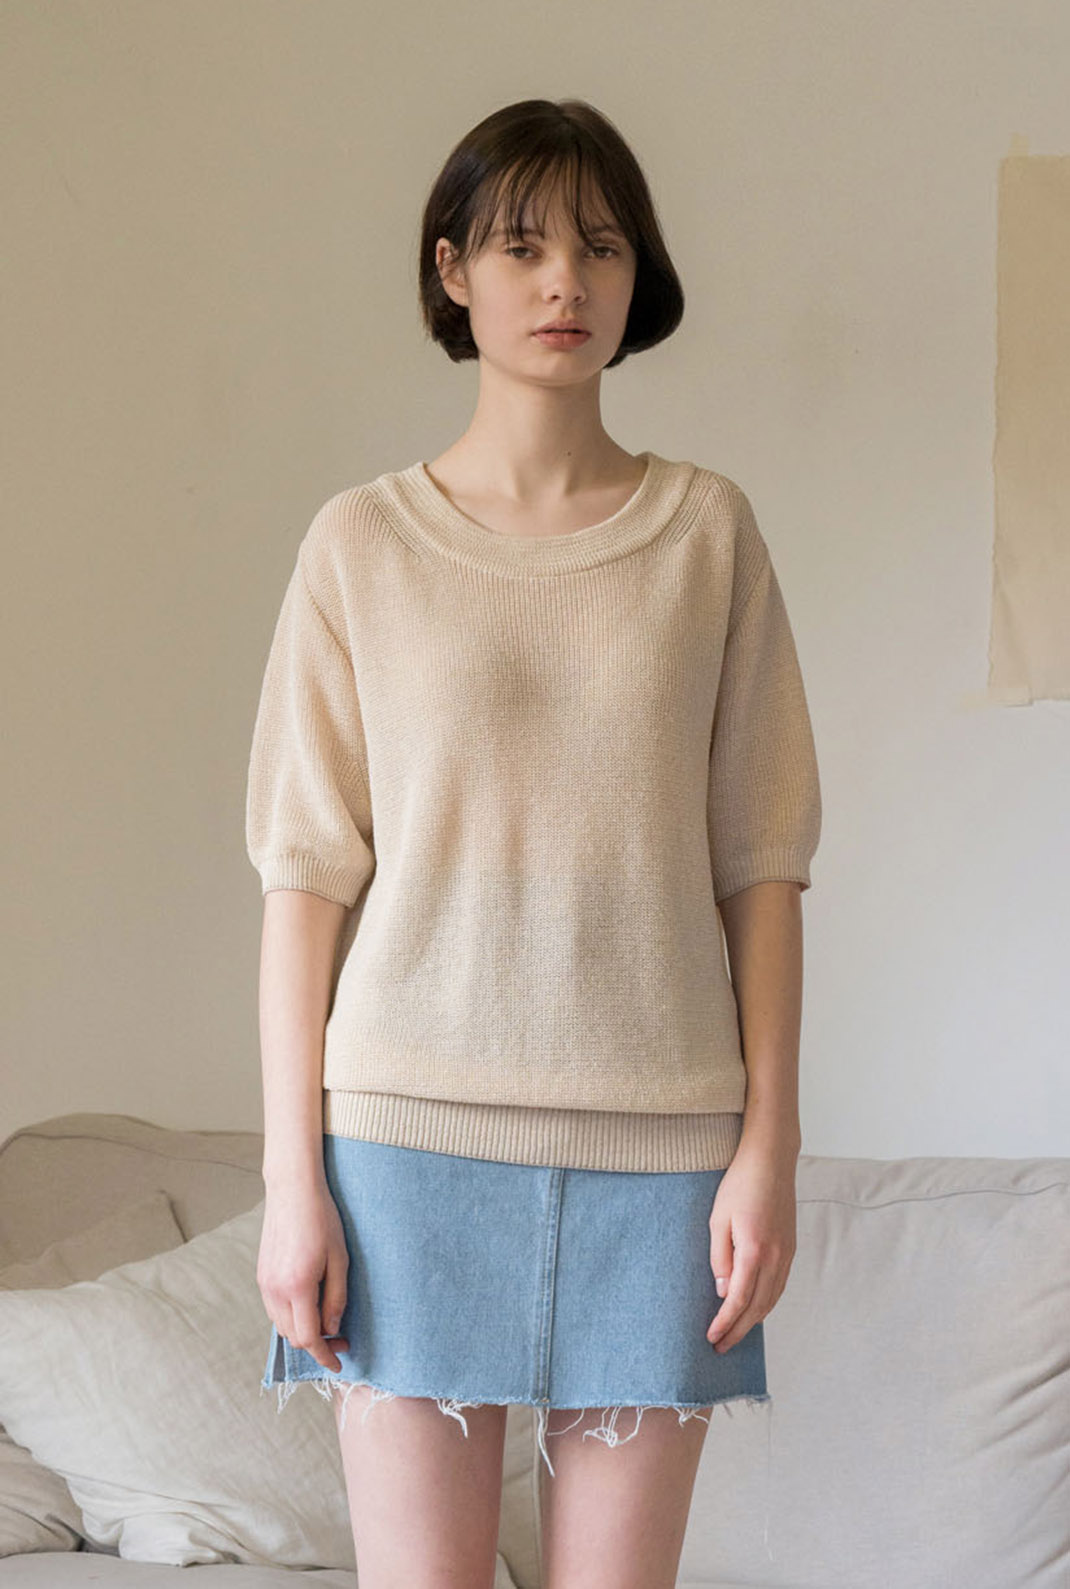 A LOOSE KNIT